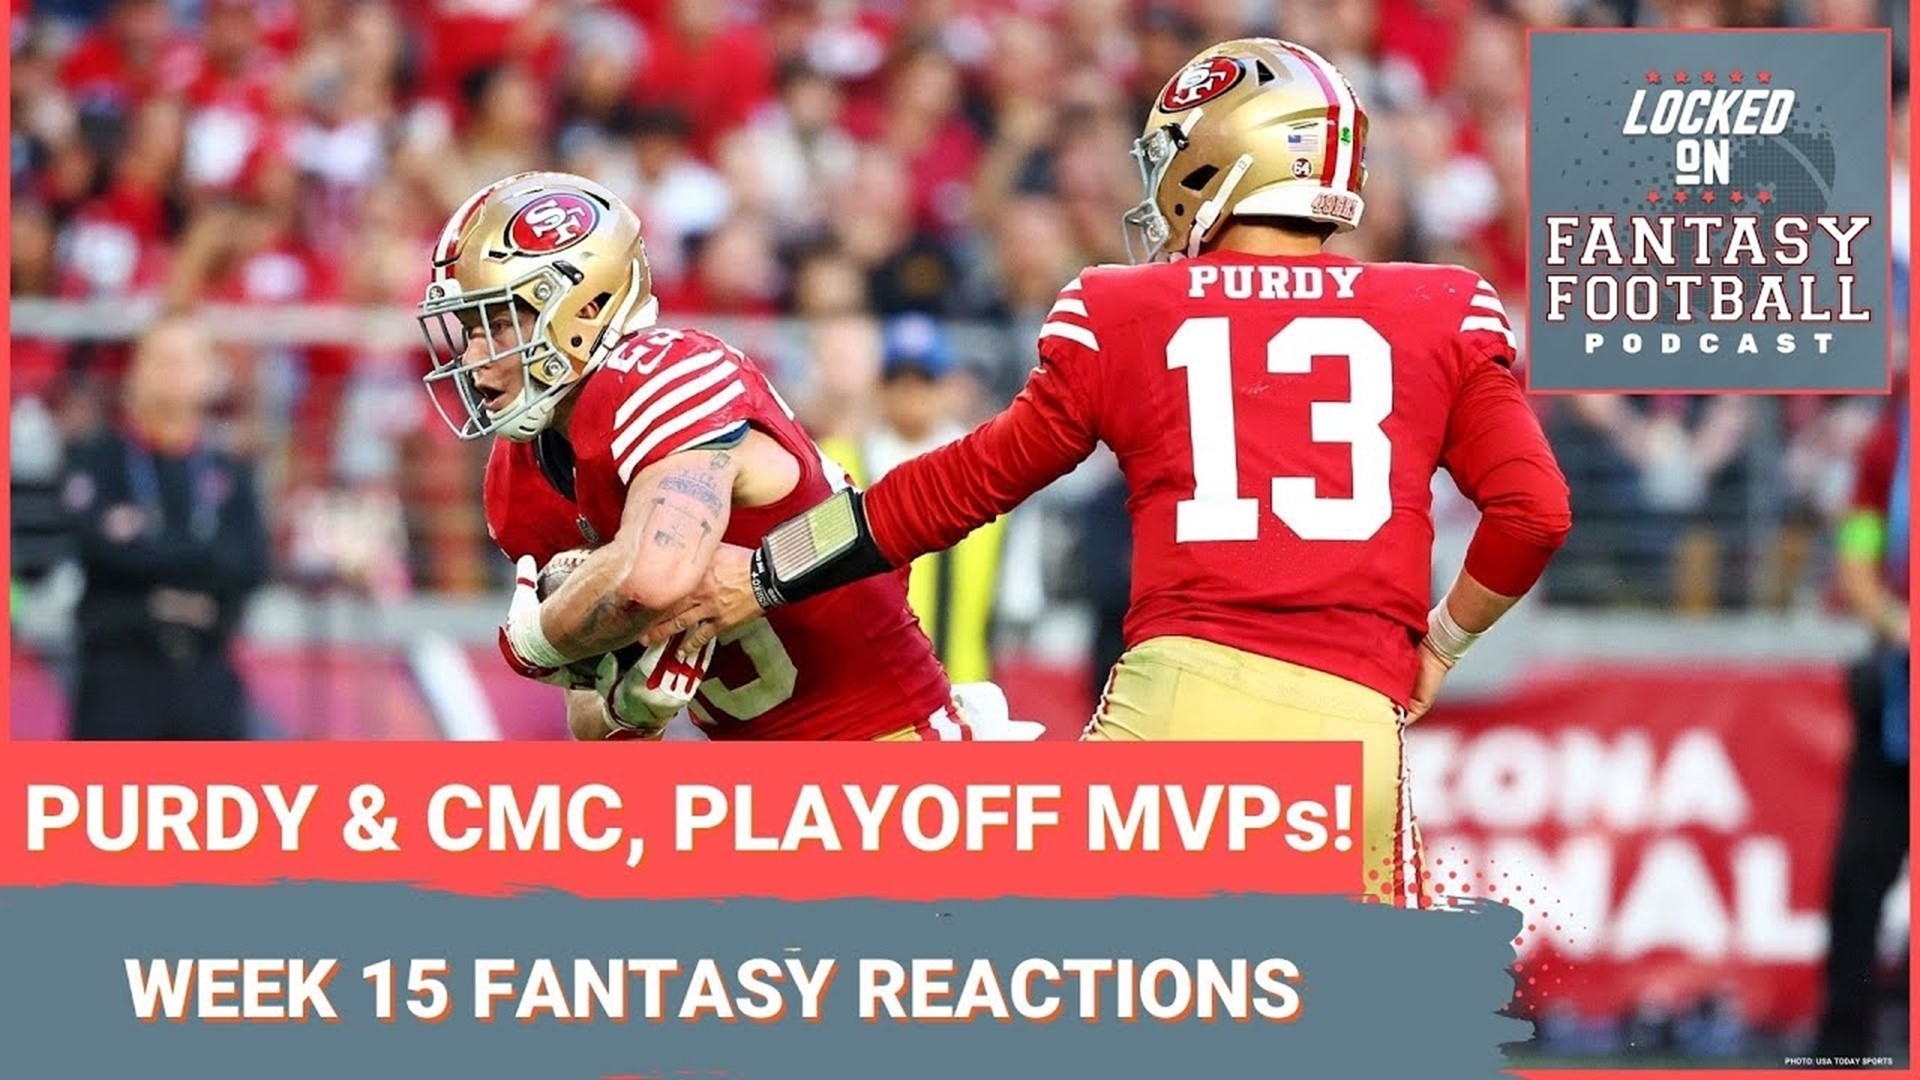 Sporting News' Vinnie Iyer and NFL.com's Michelle Magdziuk examine the fantasy football fallout from Week 15's Saturday and Sunday NFL action.